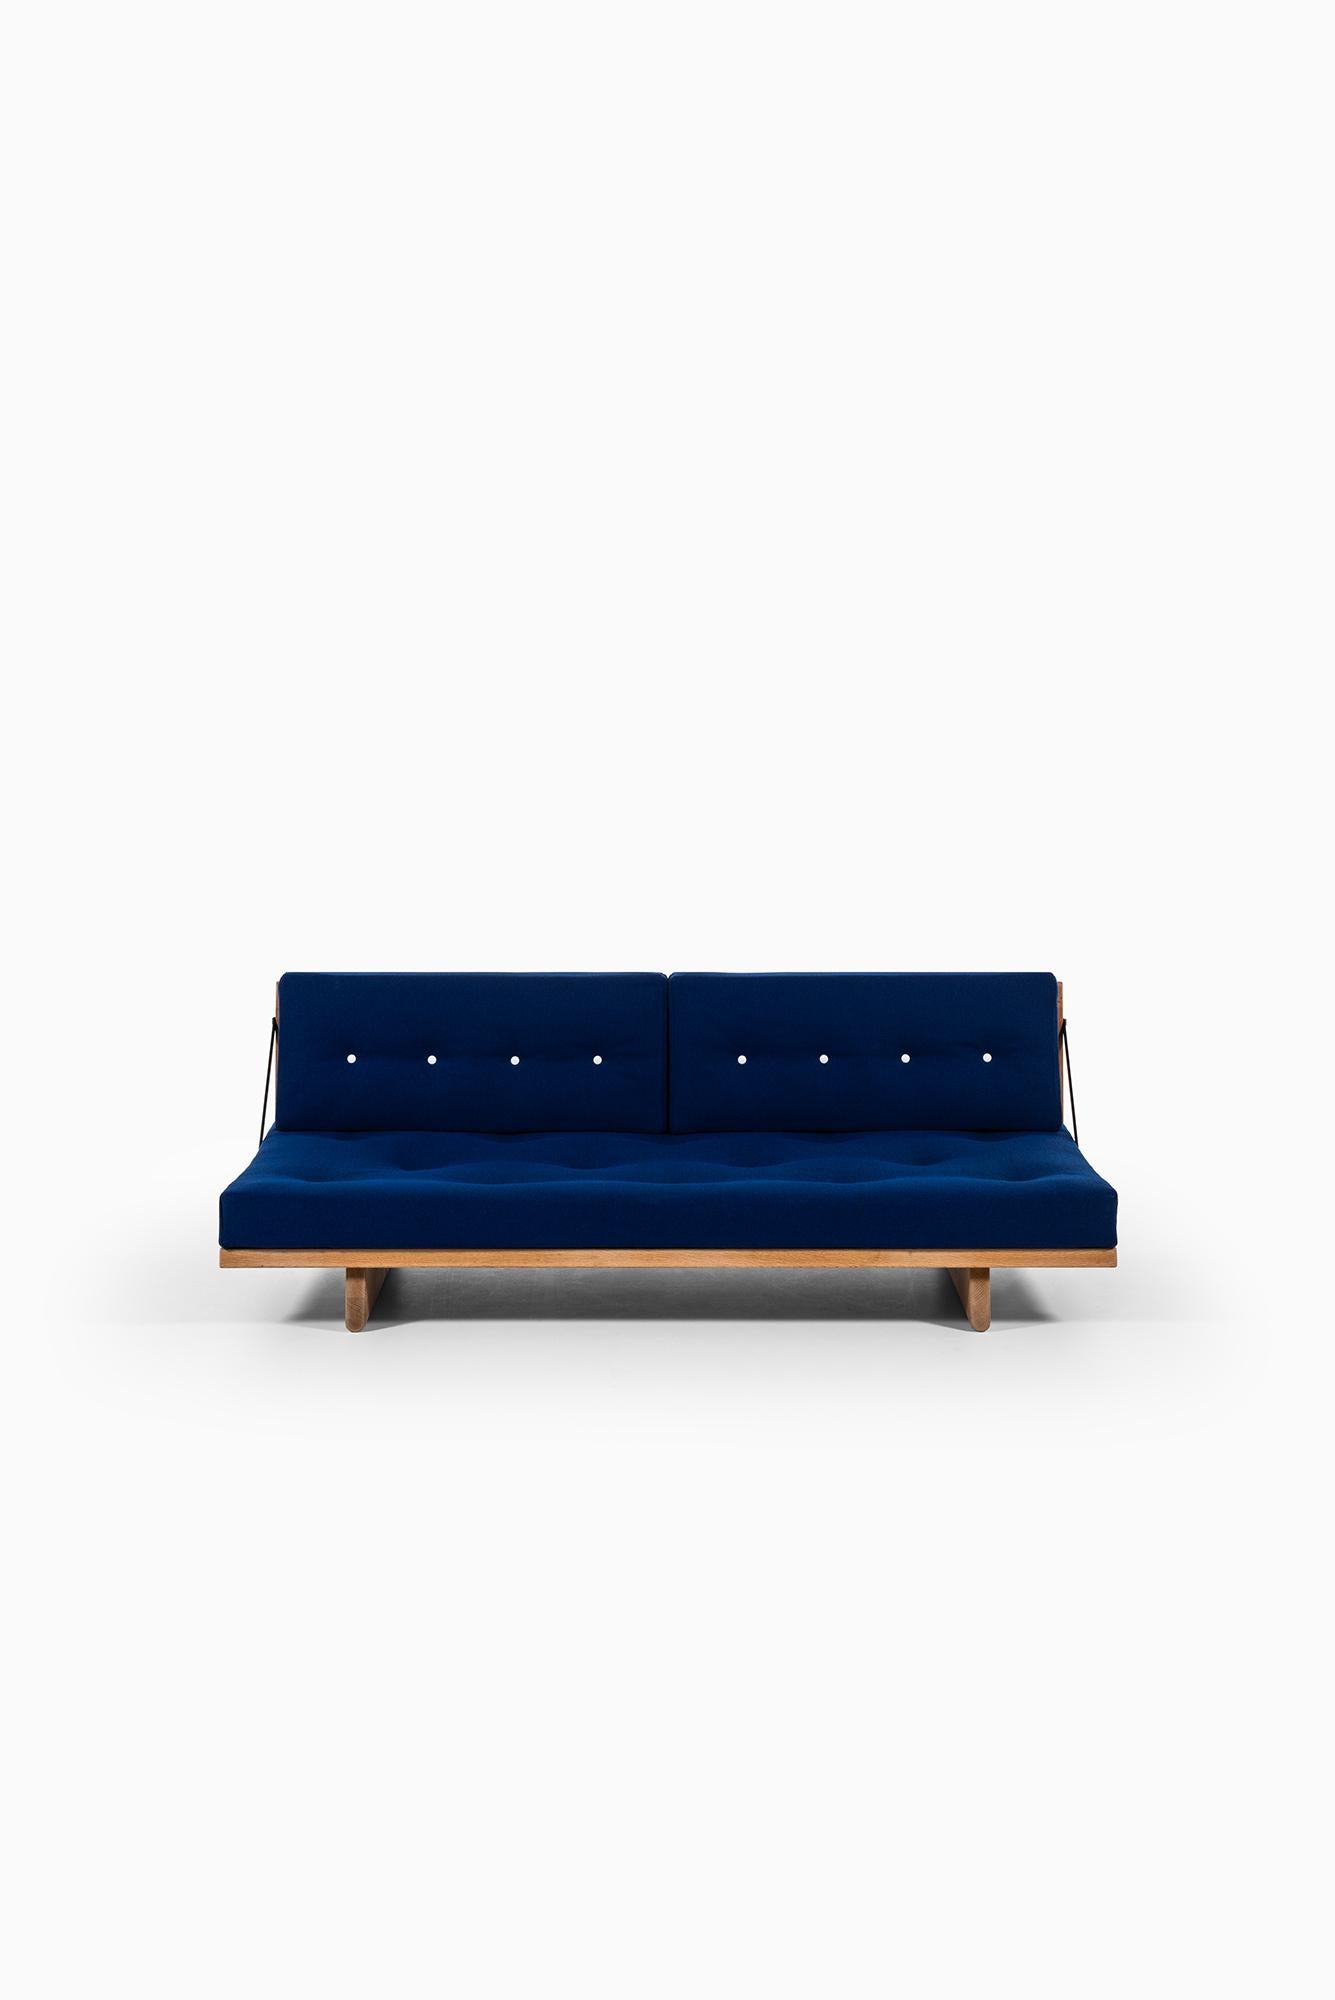 Rare sofa or daybed model 192 designed by Børge Mogensen. Produced by Fredericia Stolefabrik in Denmark.